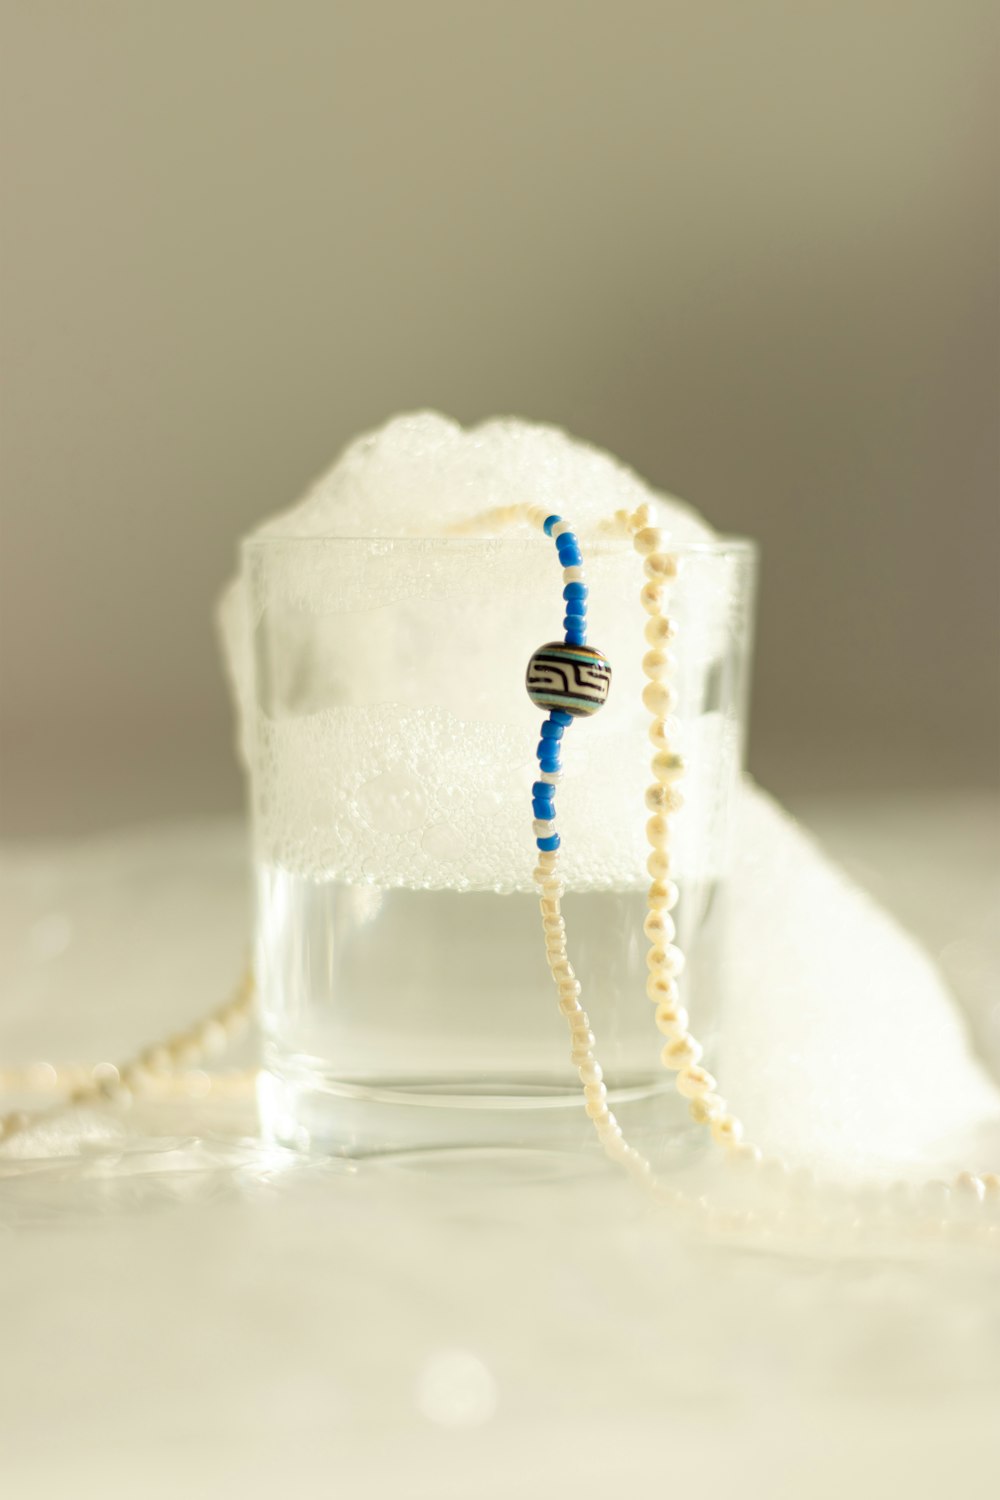 a beaded necklace sitting on top of a glass of water